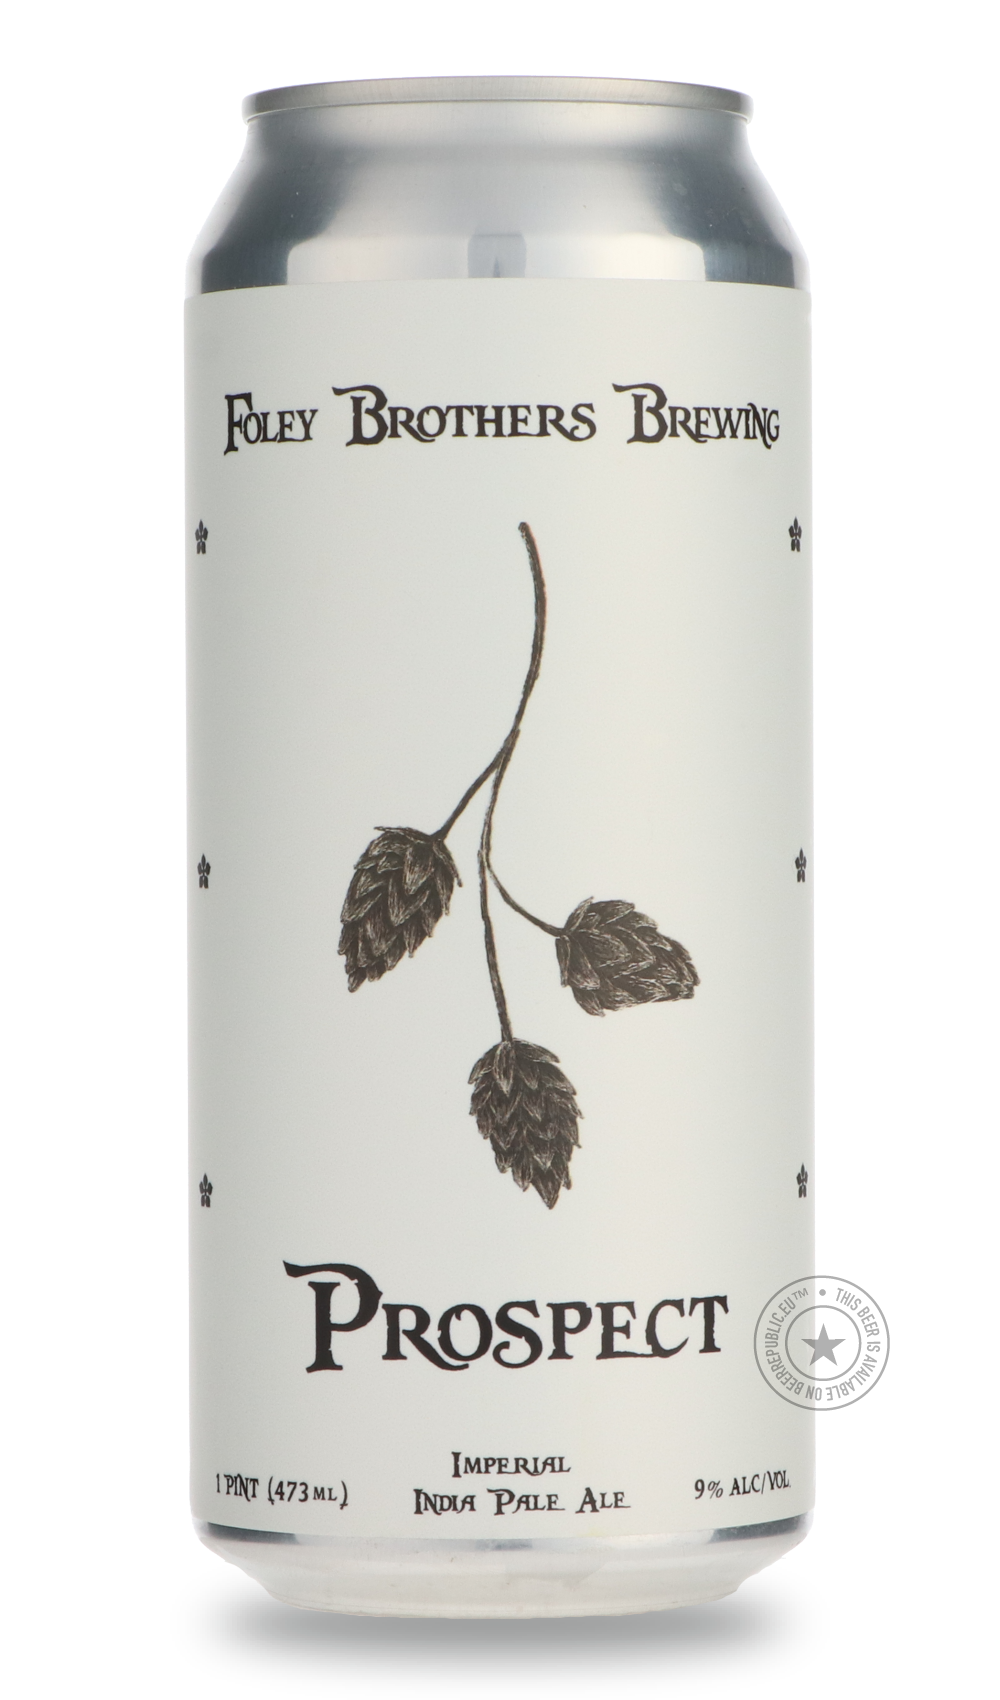 -Foley Brothers- Prospect-IPA- Only @ Beer Republic - The best online beer store for American & Canadian craft beer - Buy beer online from the USA and Canada - Bier online kopen - Amerikaans bier kopen - Craft beer store - Craft beer kopen - Amerikanisch bier kaufen - Bier online kaufen - Acheter biere online - IPA - Stout - Porter - New England IPA - Hazy IPA - Imperial Stout - Barrel Aged - Barrel Aged Imperial Stout - Brown - Dark beer - Blond - Blonde - Pilsner - Lager - Wheat - Weizen - Amber - Barley 